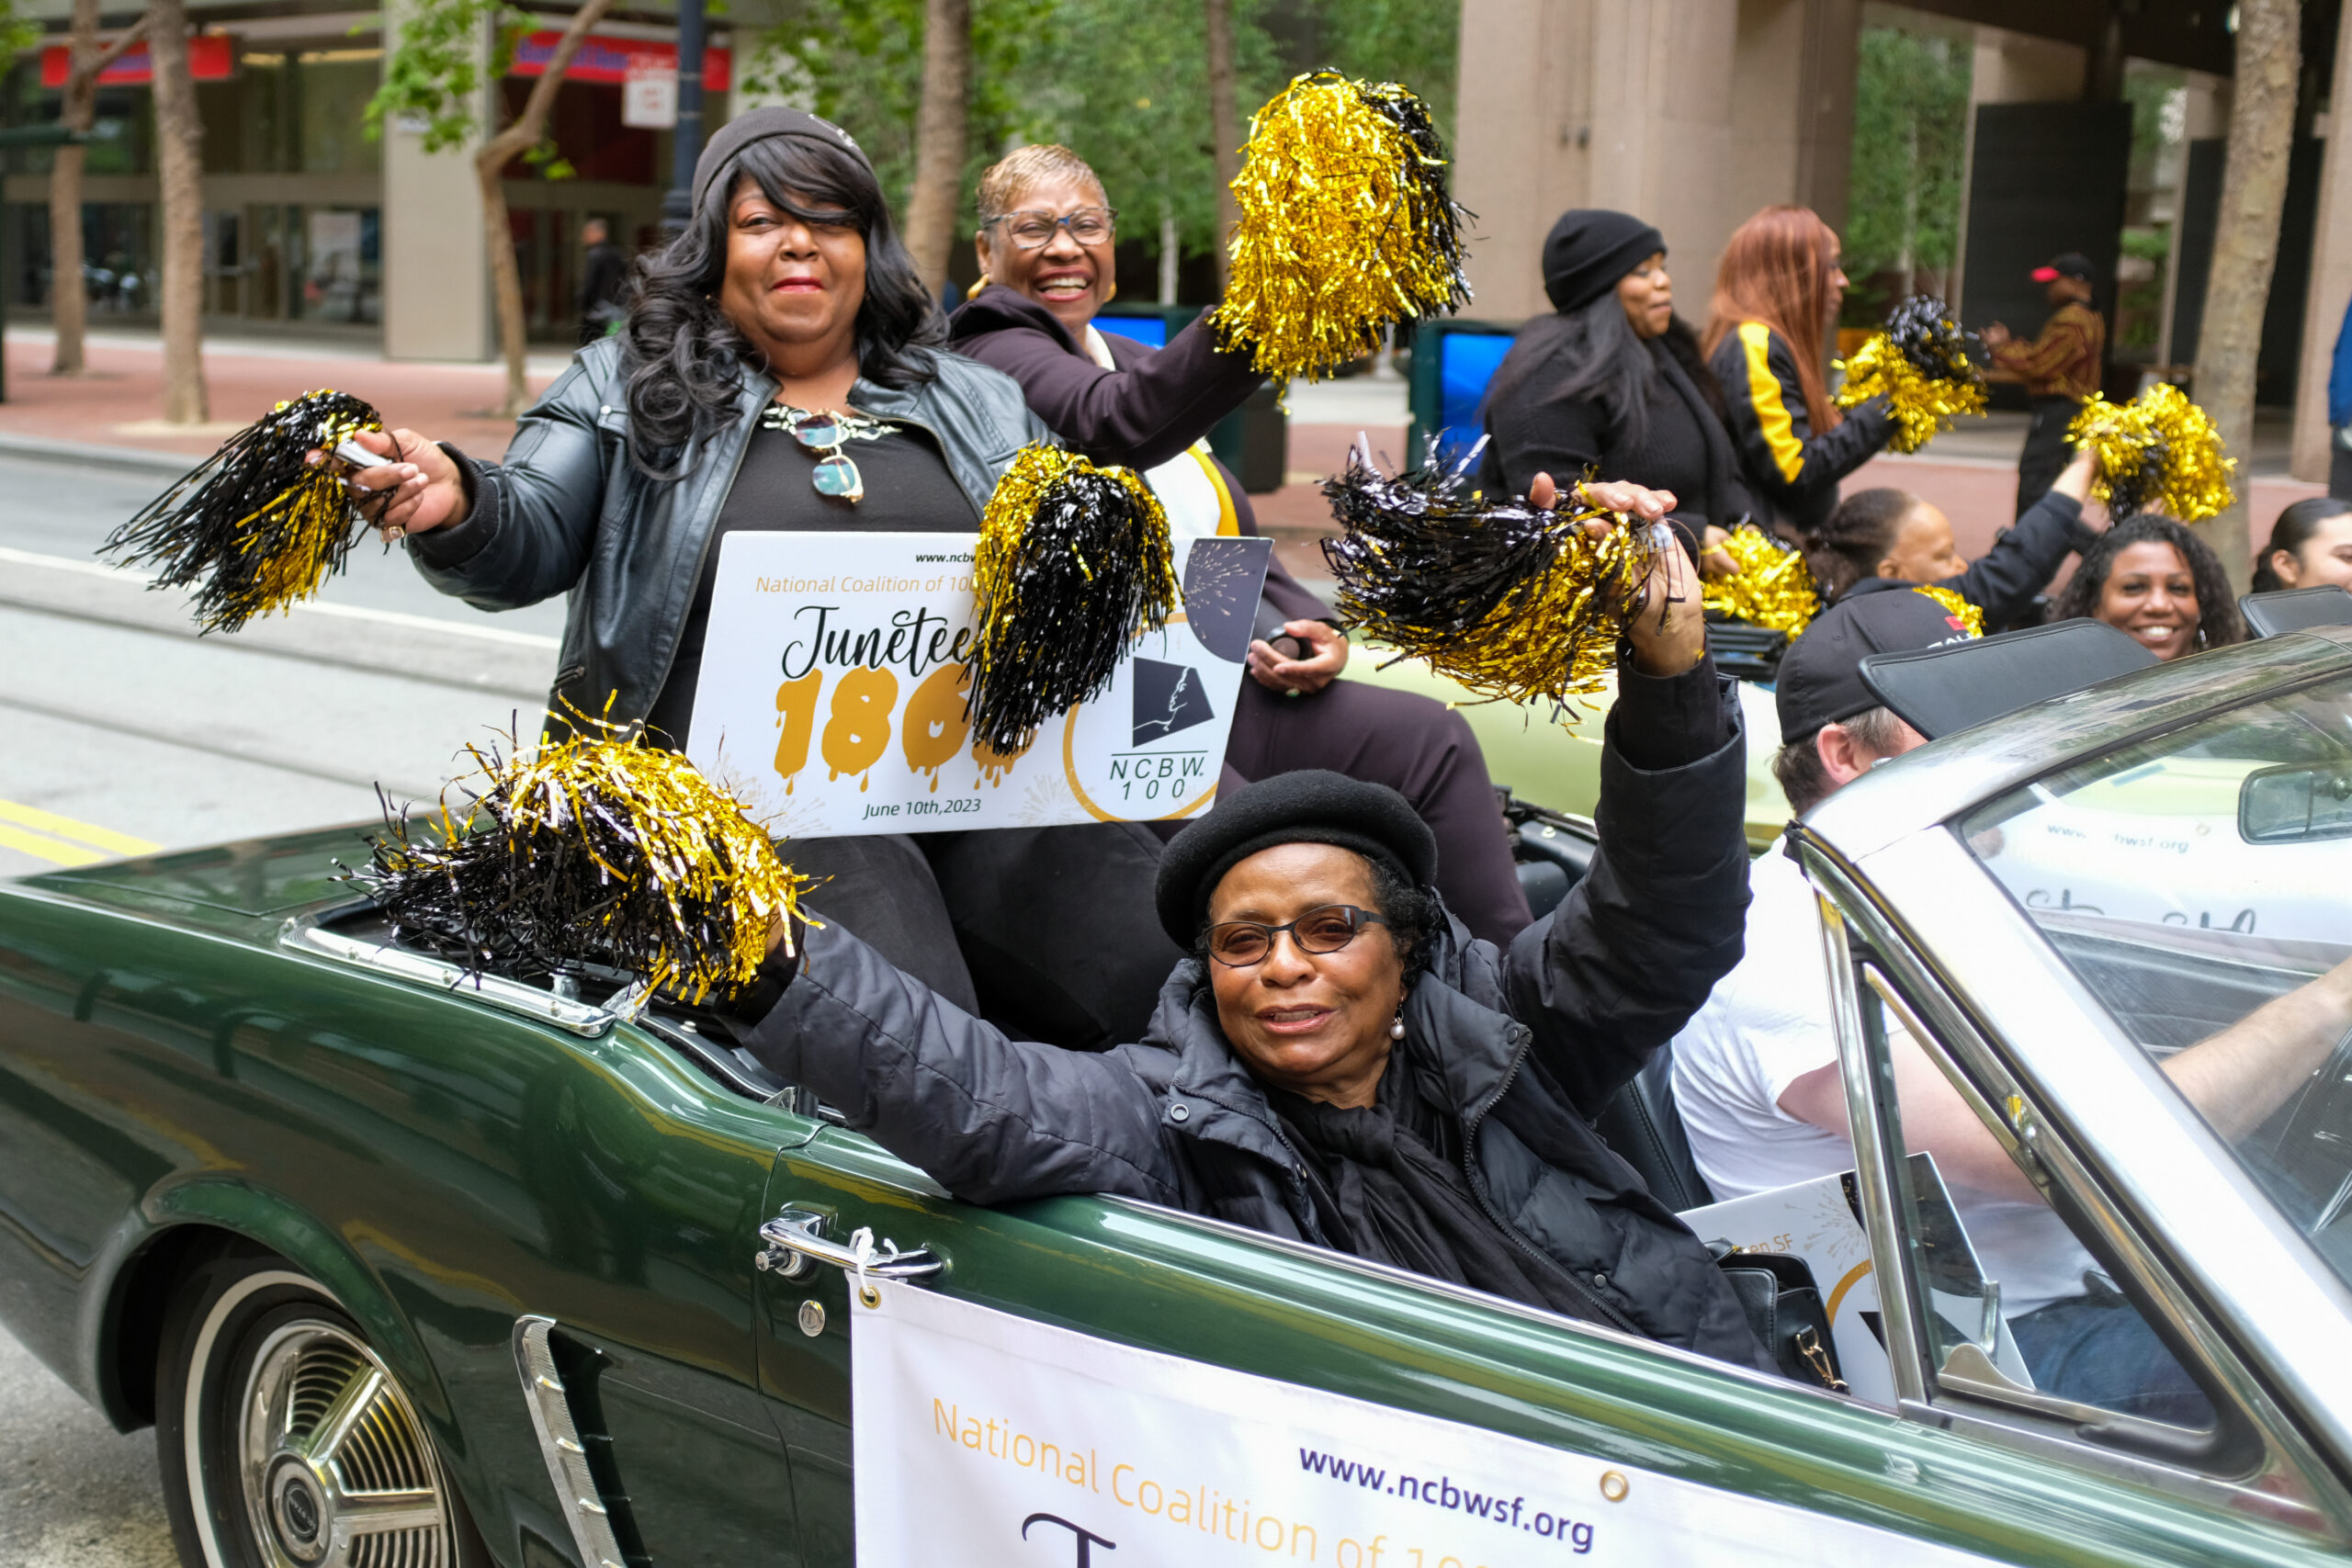 People in a car parade, holding pom-poms and a Juneteenth sign, celebrating with joyous expressions.